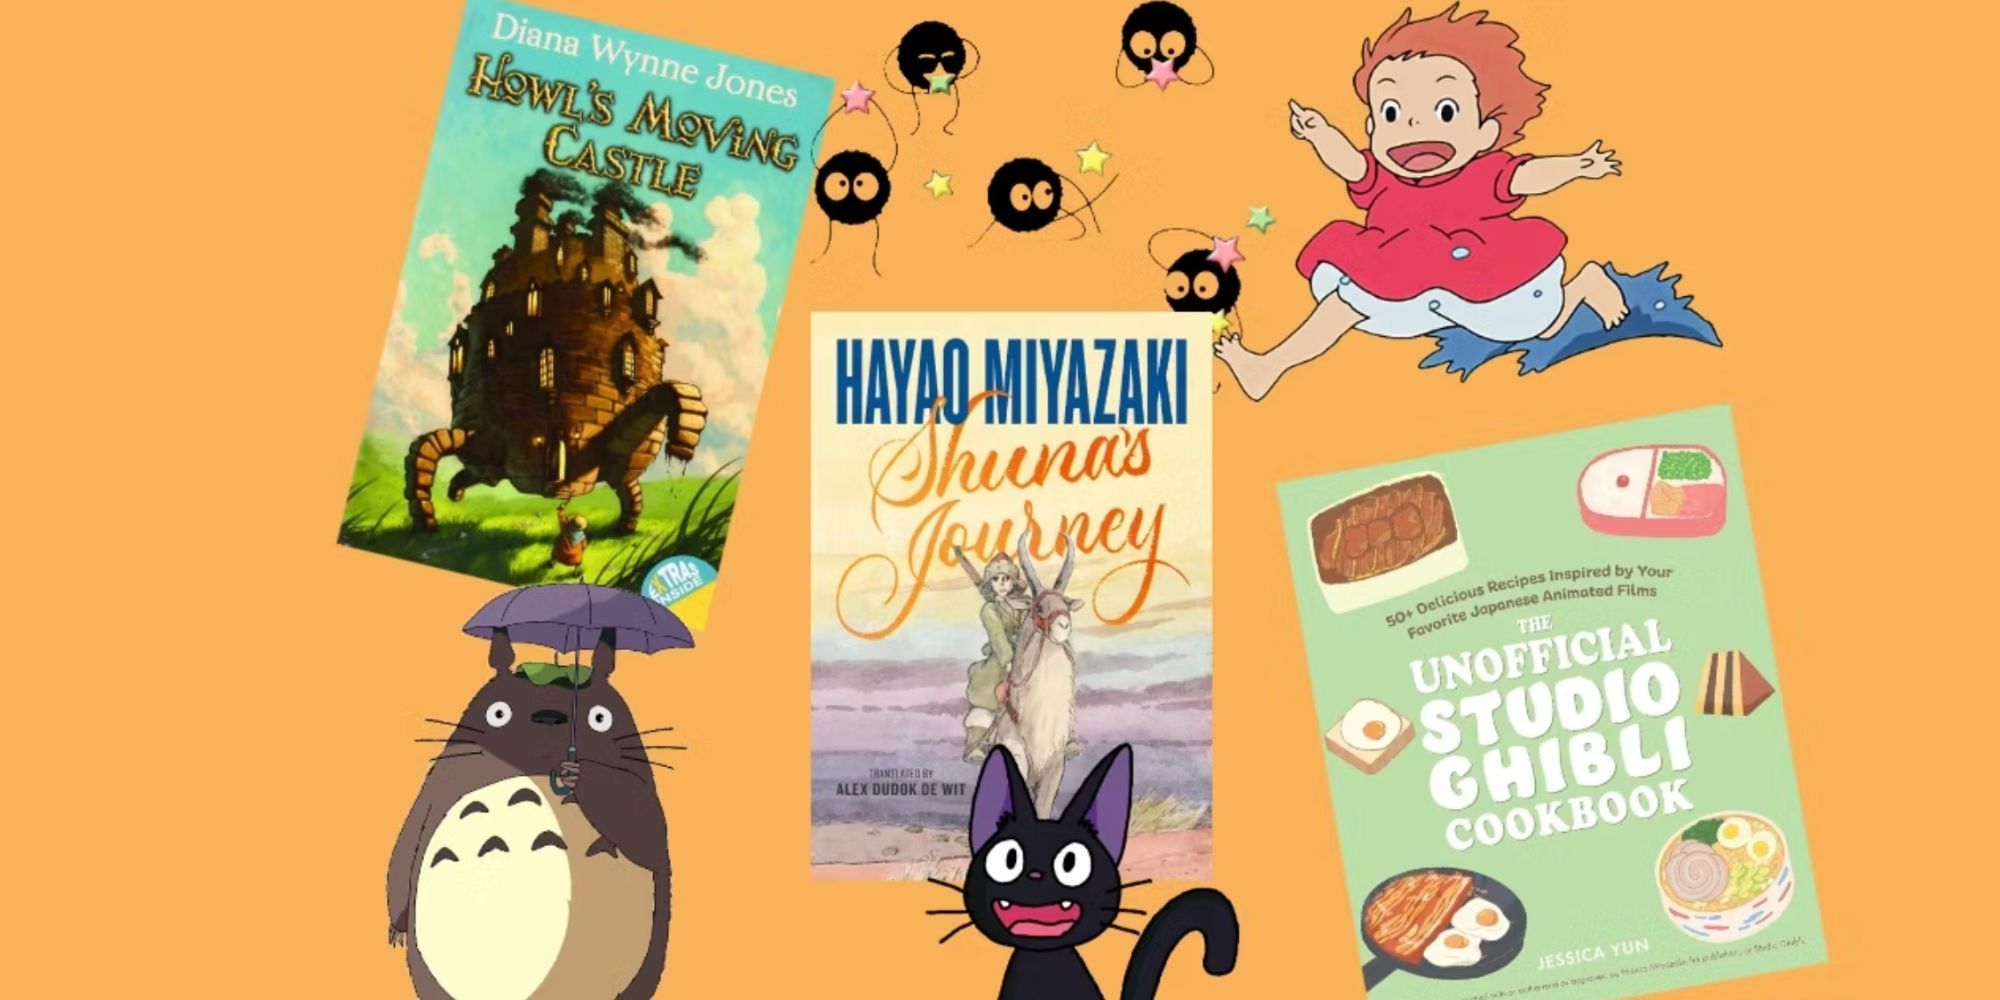 Collage of Ghibli related books with characters from the films